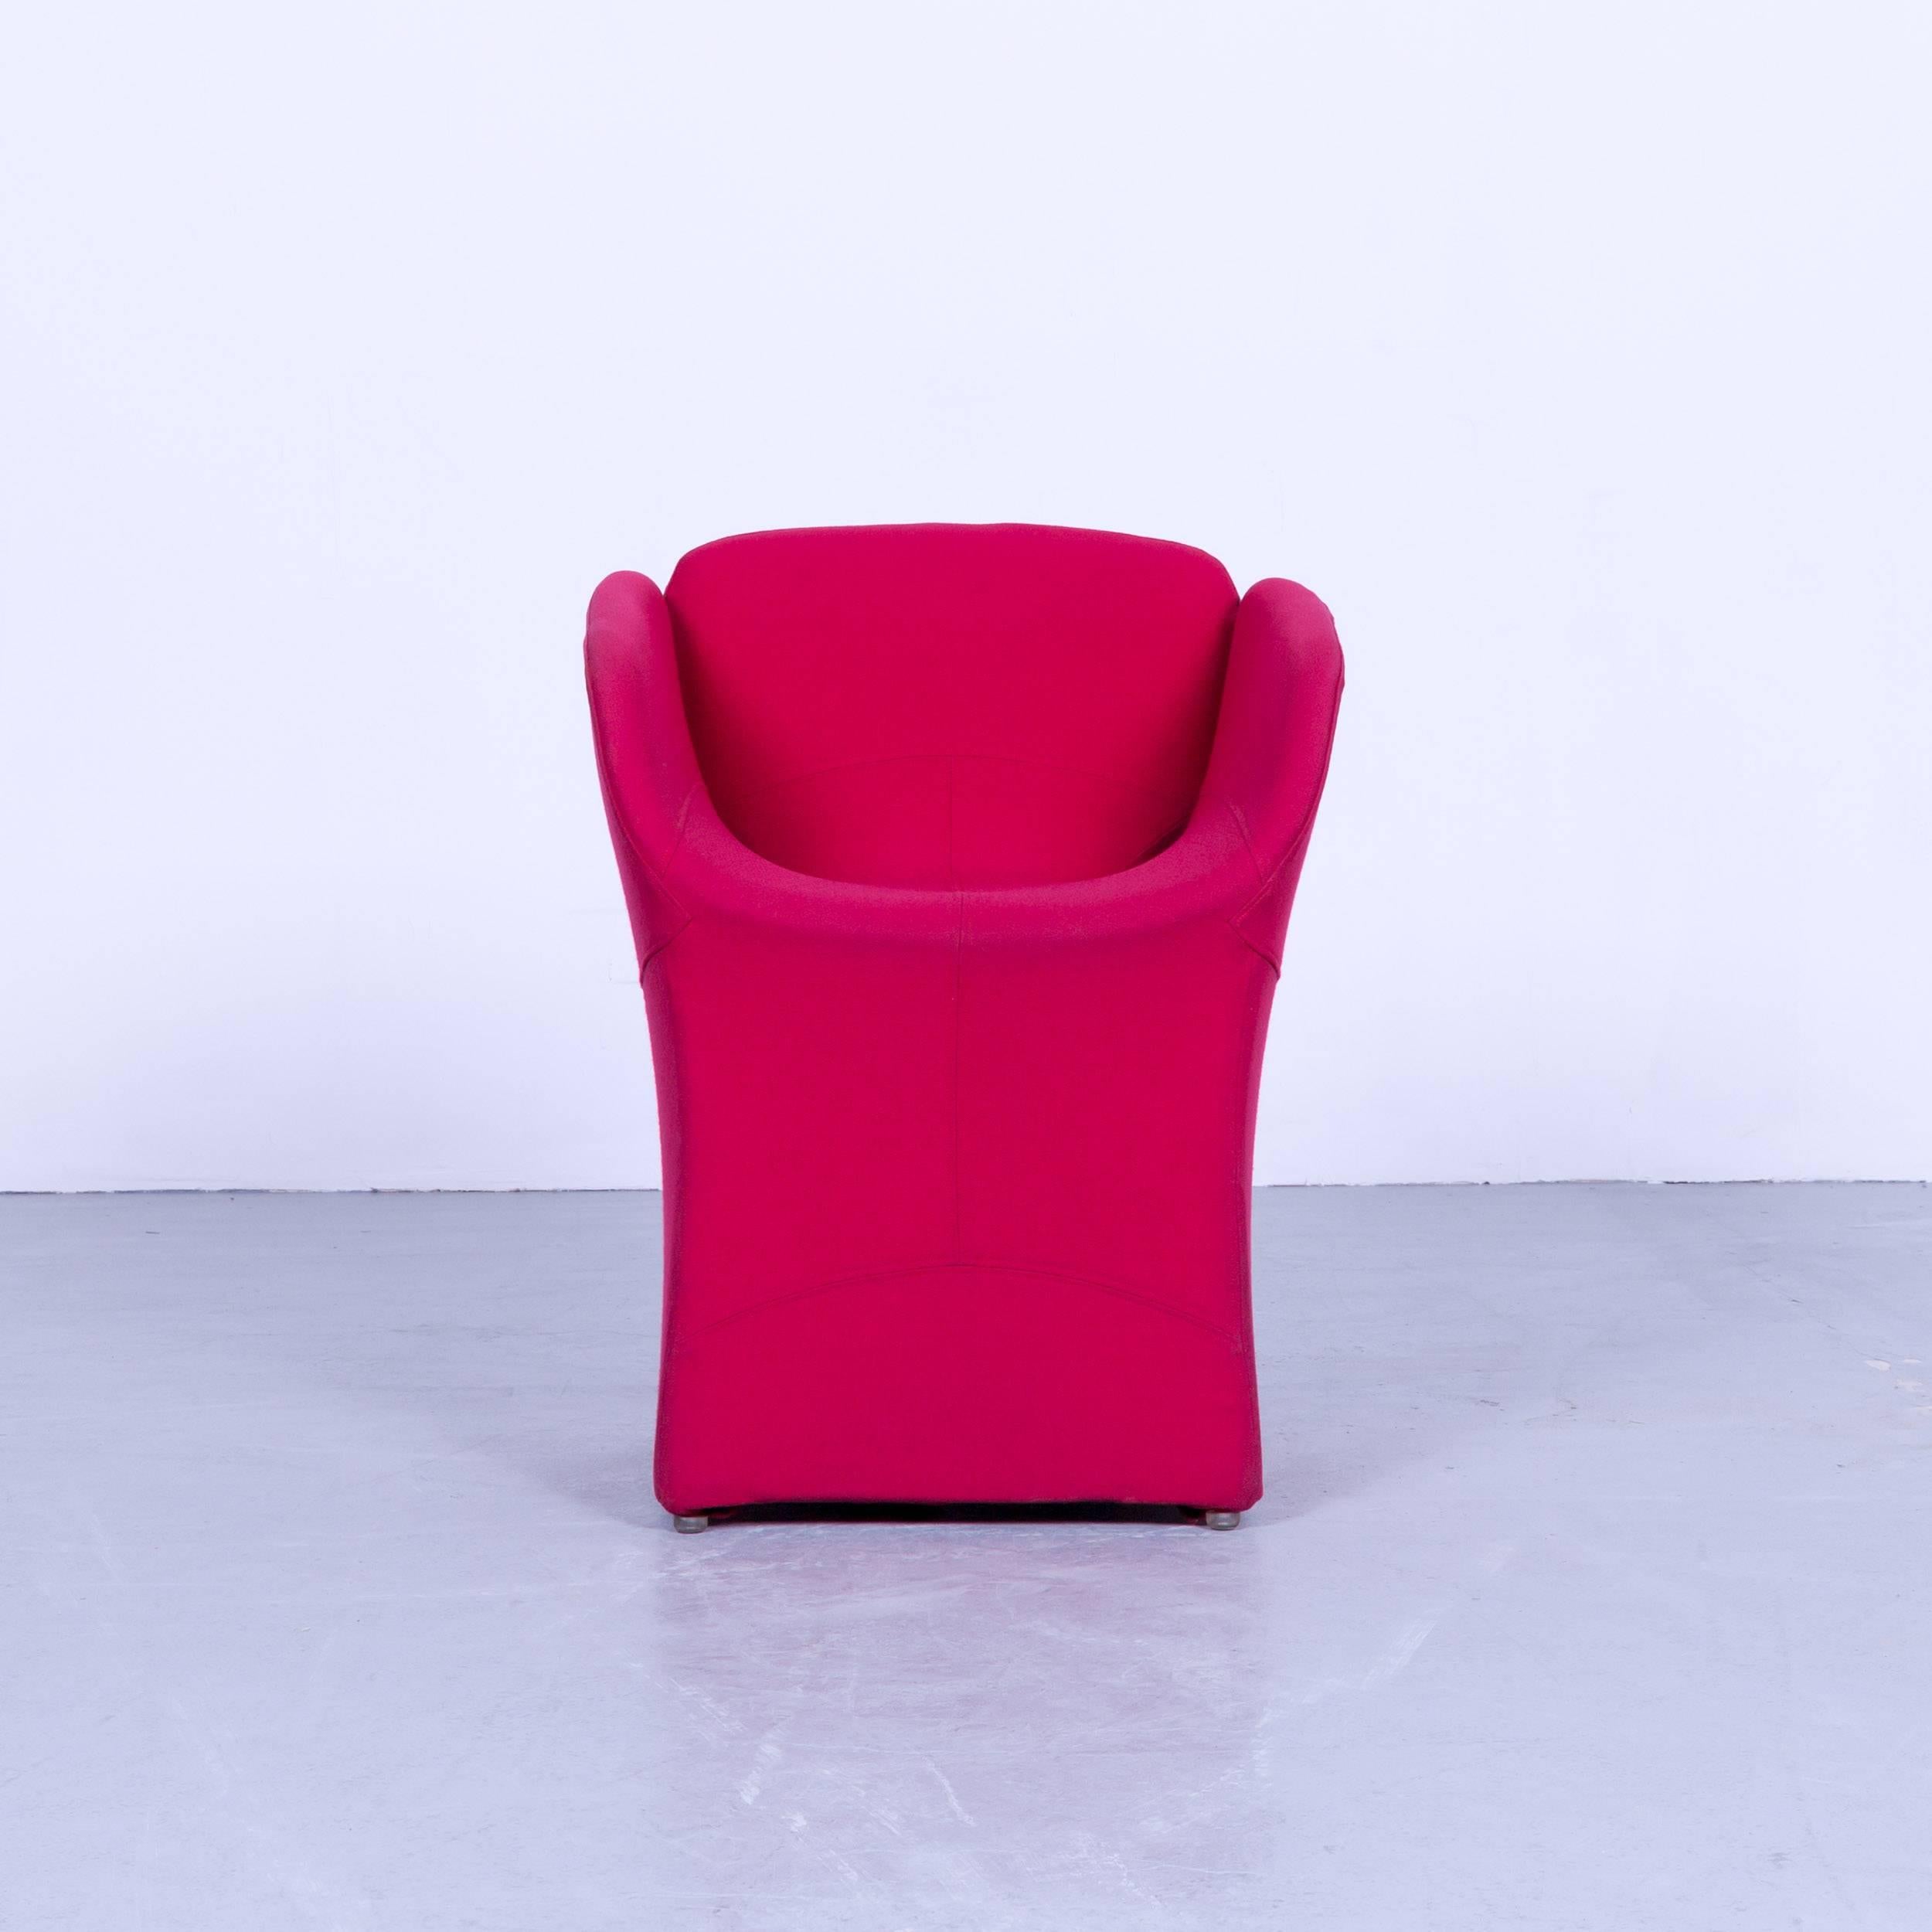 Moroso Bloomy Designer Chair in high quality red fabric by Patricia Urquiola, in a minimalistic and modern design, made for pure comfort.